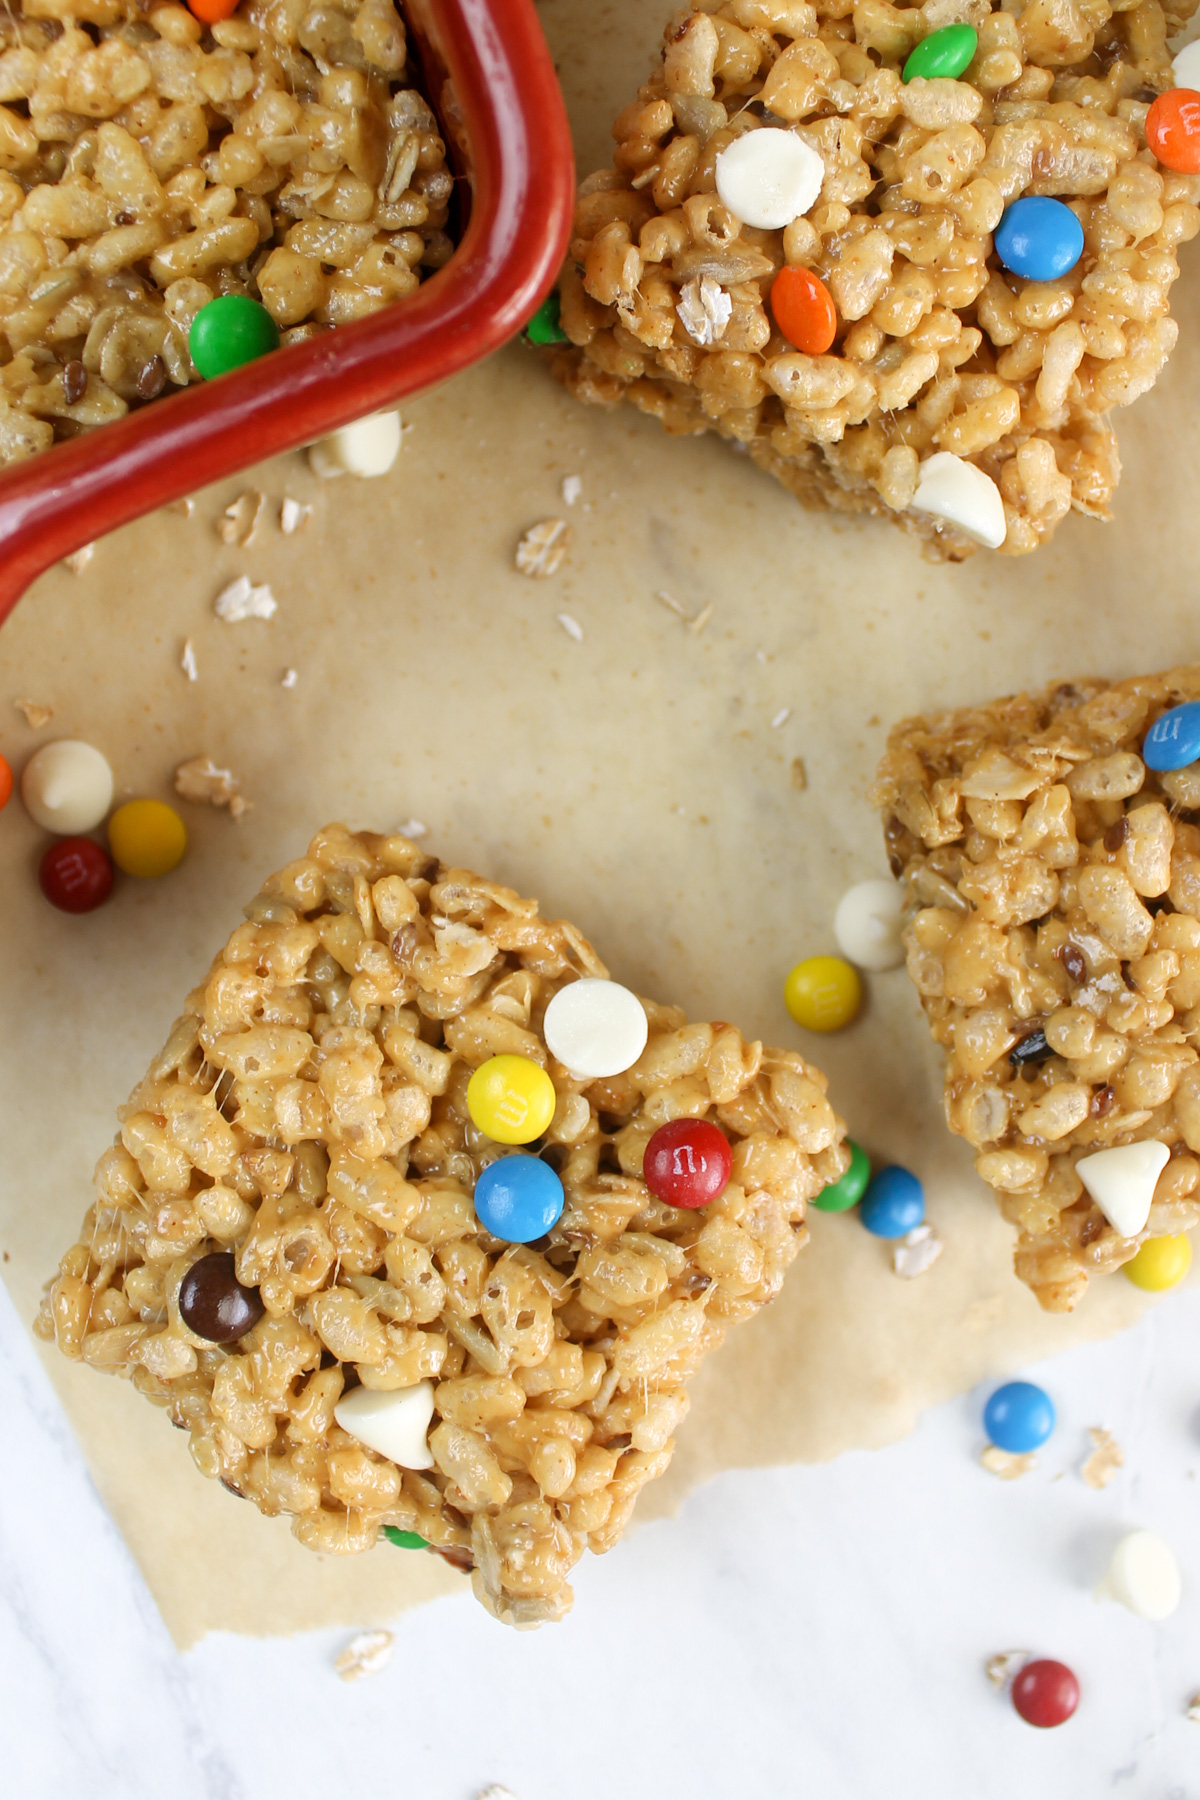 Rice krispie protein bars cut into squares with M&M's.